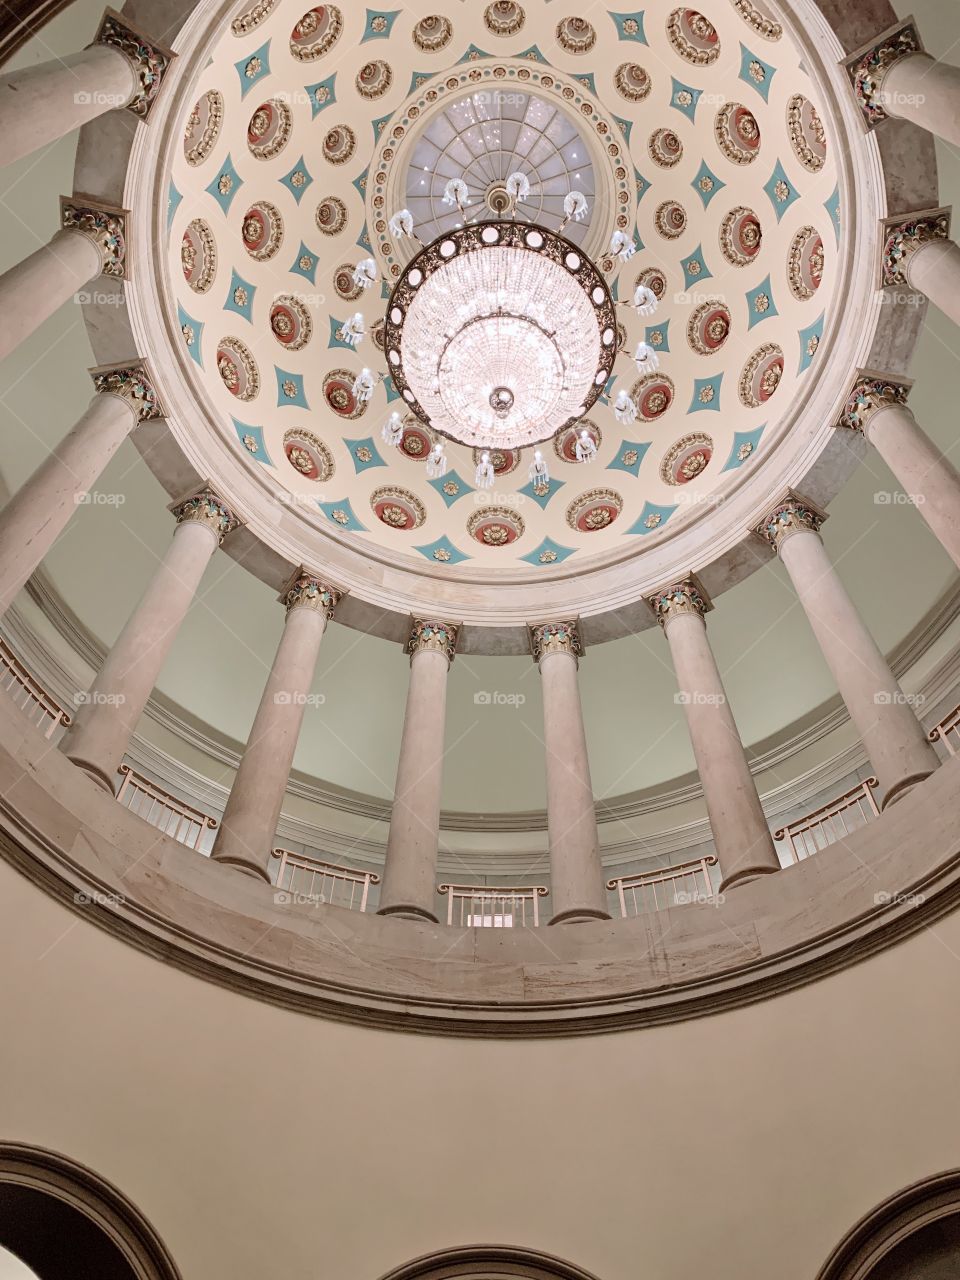 Within the capitol, this is another impressive sight above.